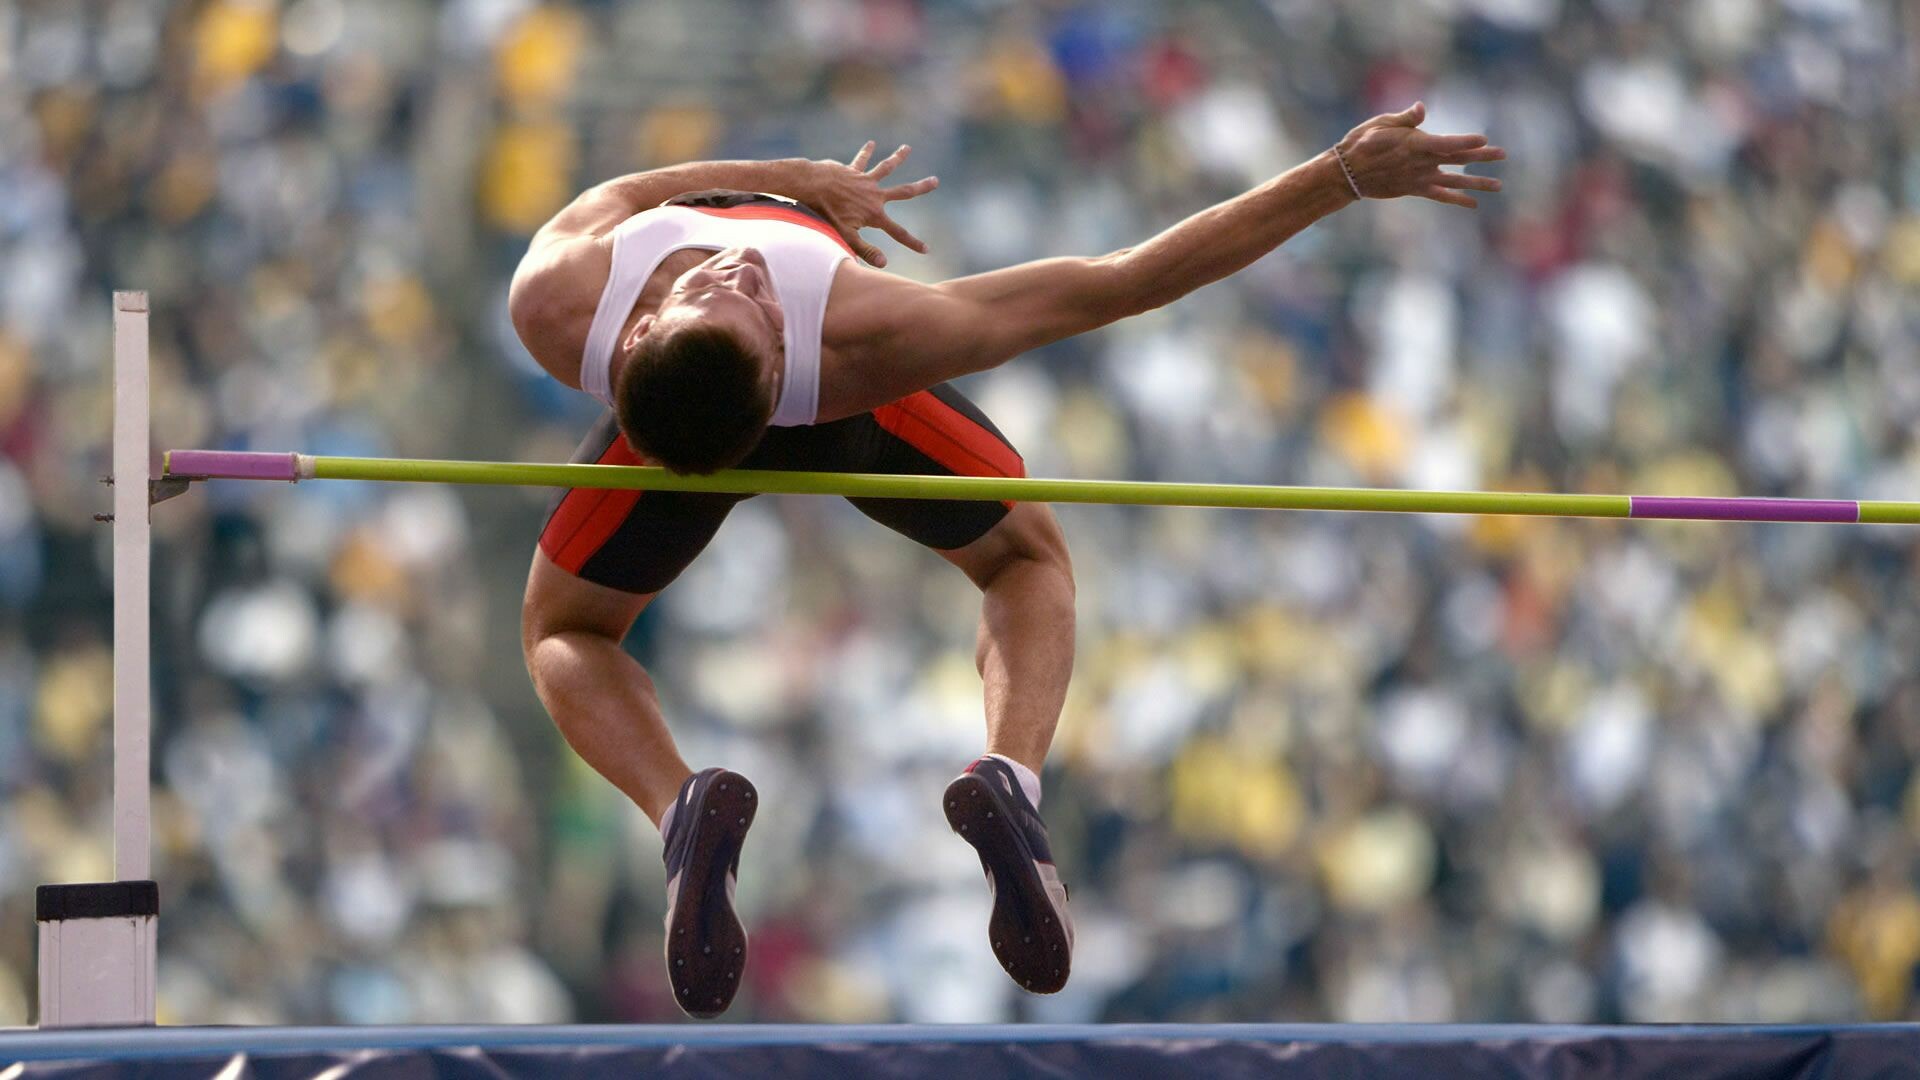 Sports HD, High jump excellence, Sportsmanship in action, Dedication and skill, 1920x1080 Full HD Desktop